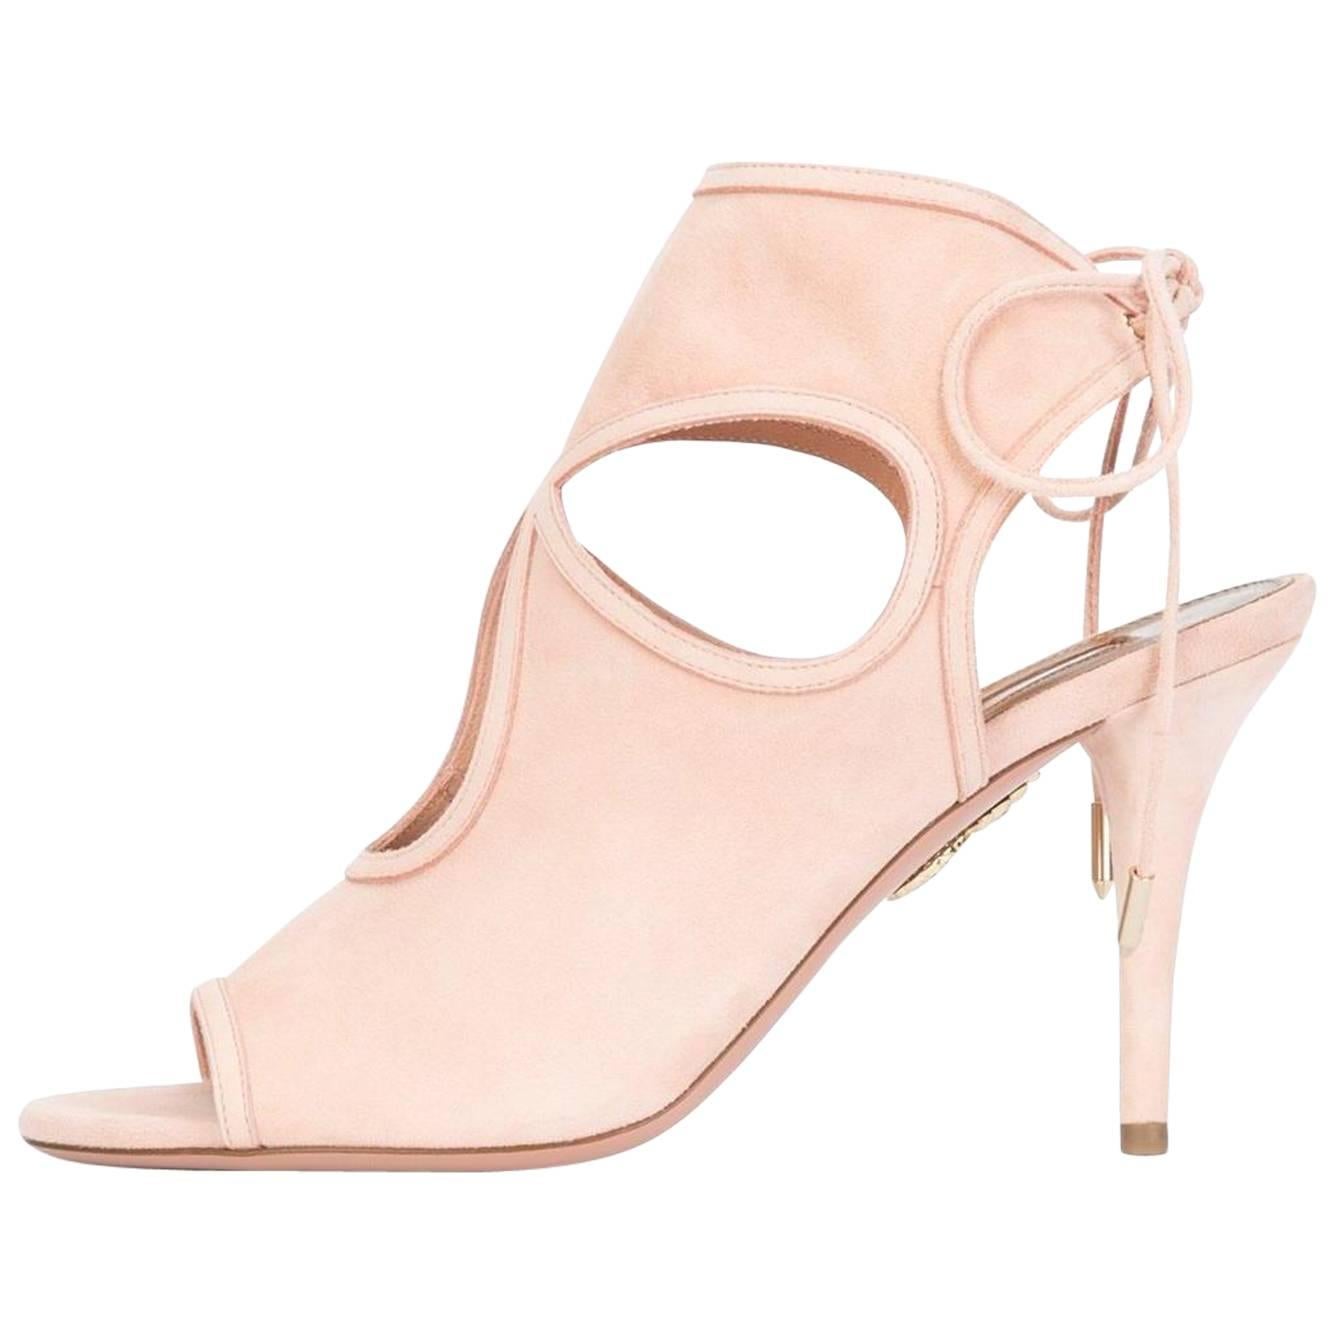 Aquazzura New Sold Out Pink Cashmere Suede Cut Out Sandals Heels in Box